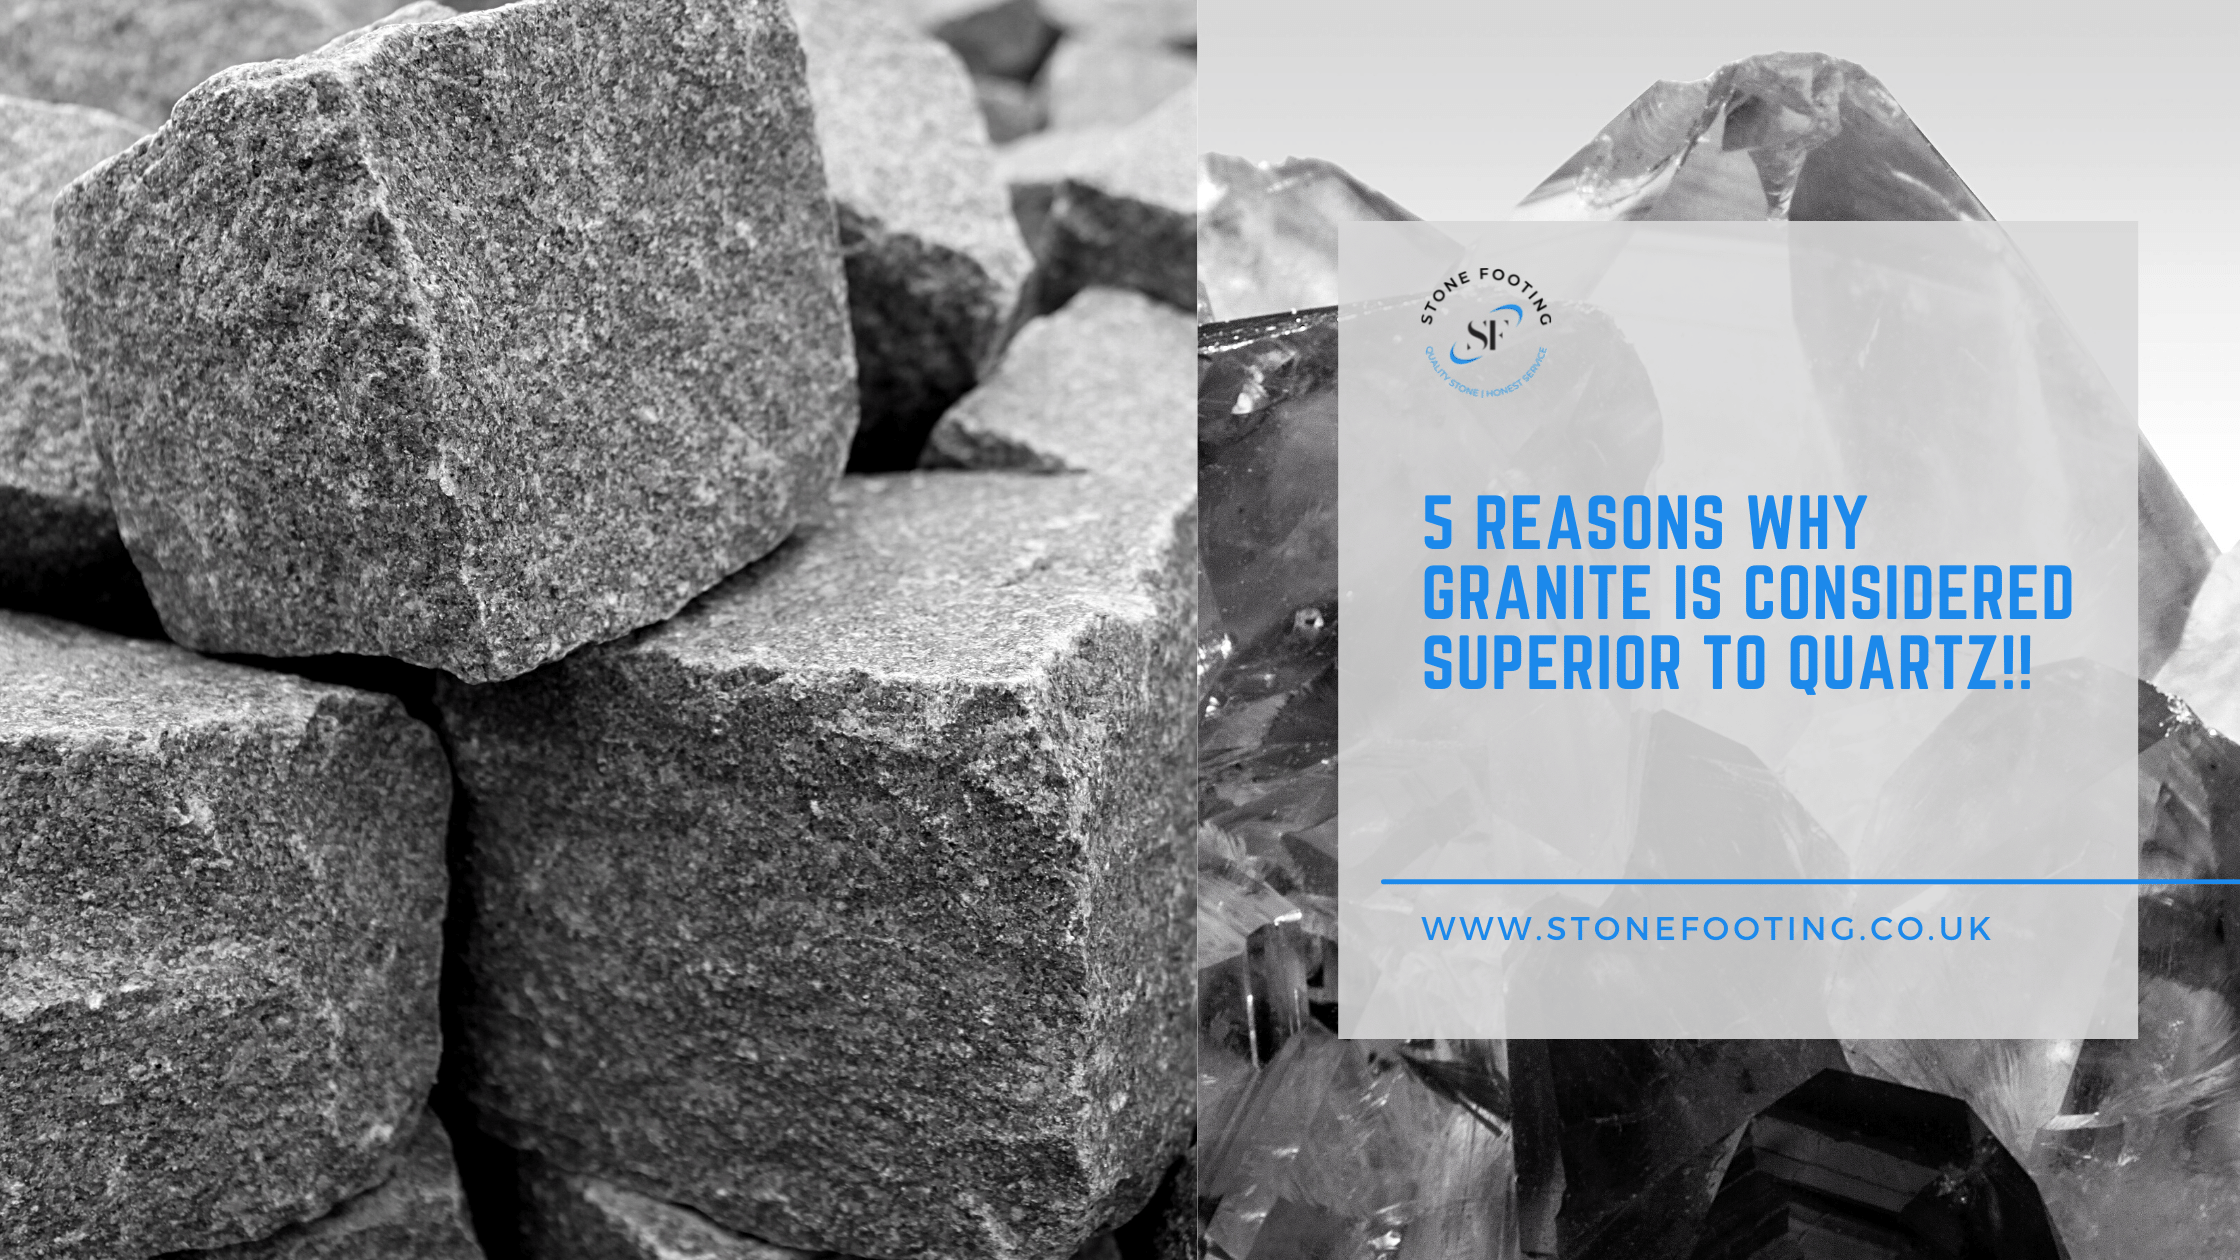 5 Reasons Why Granite Is Considered Superior To Quartz